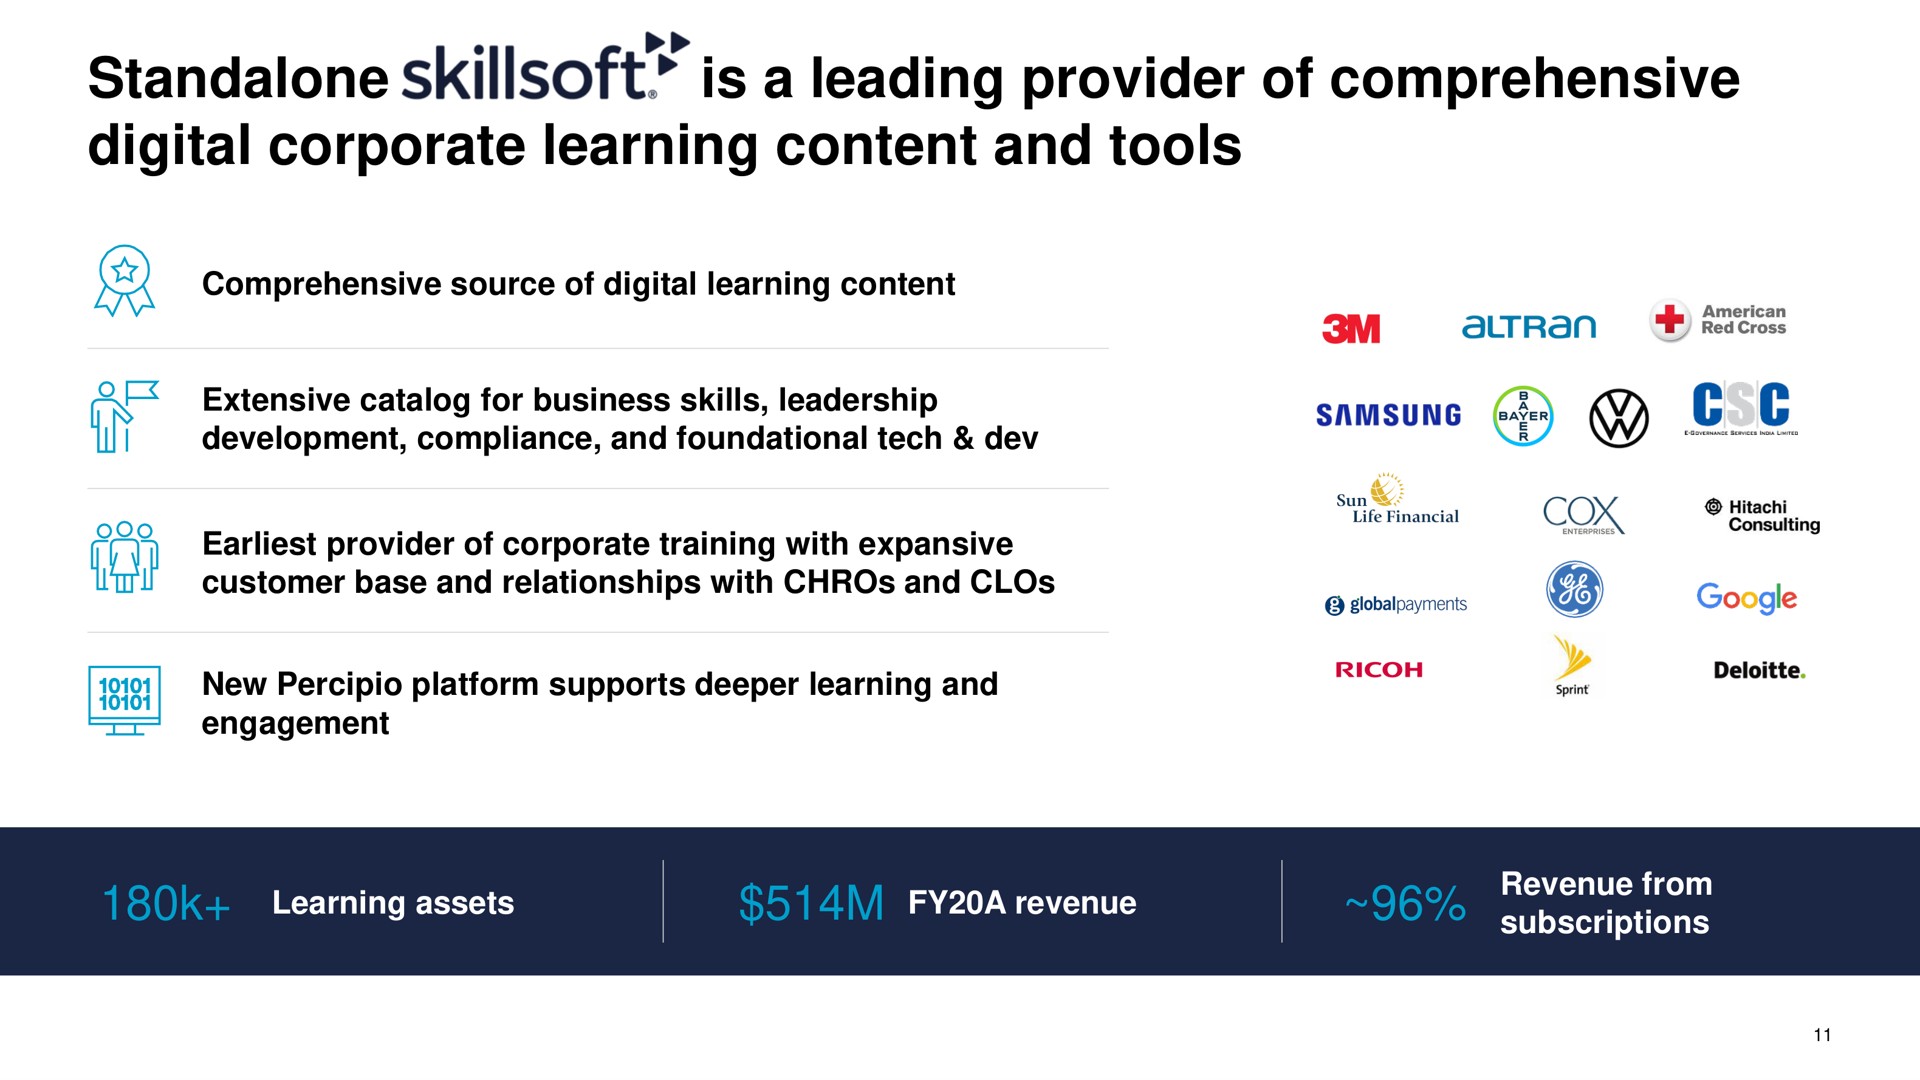 is a leading provider of comprehensive digital corporate learning content and tools | Skillsoft